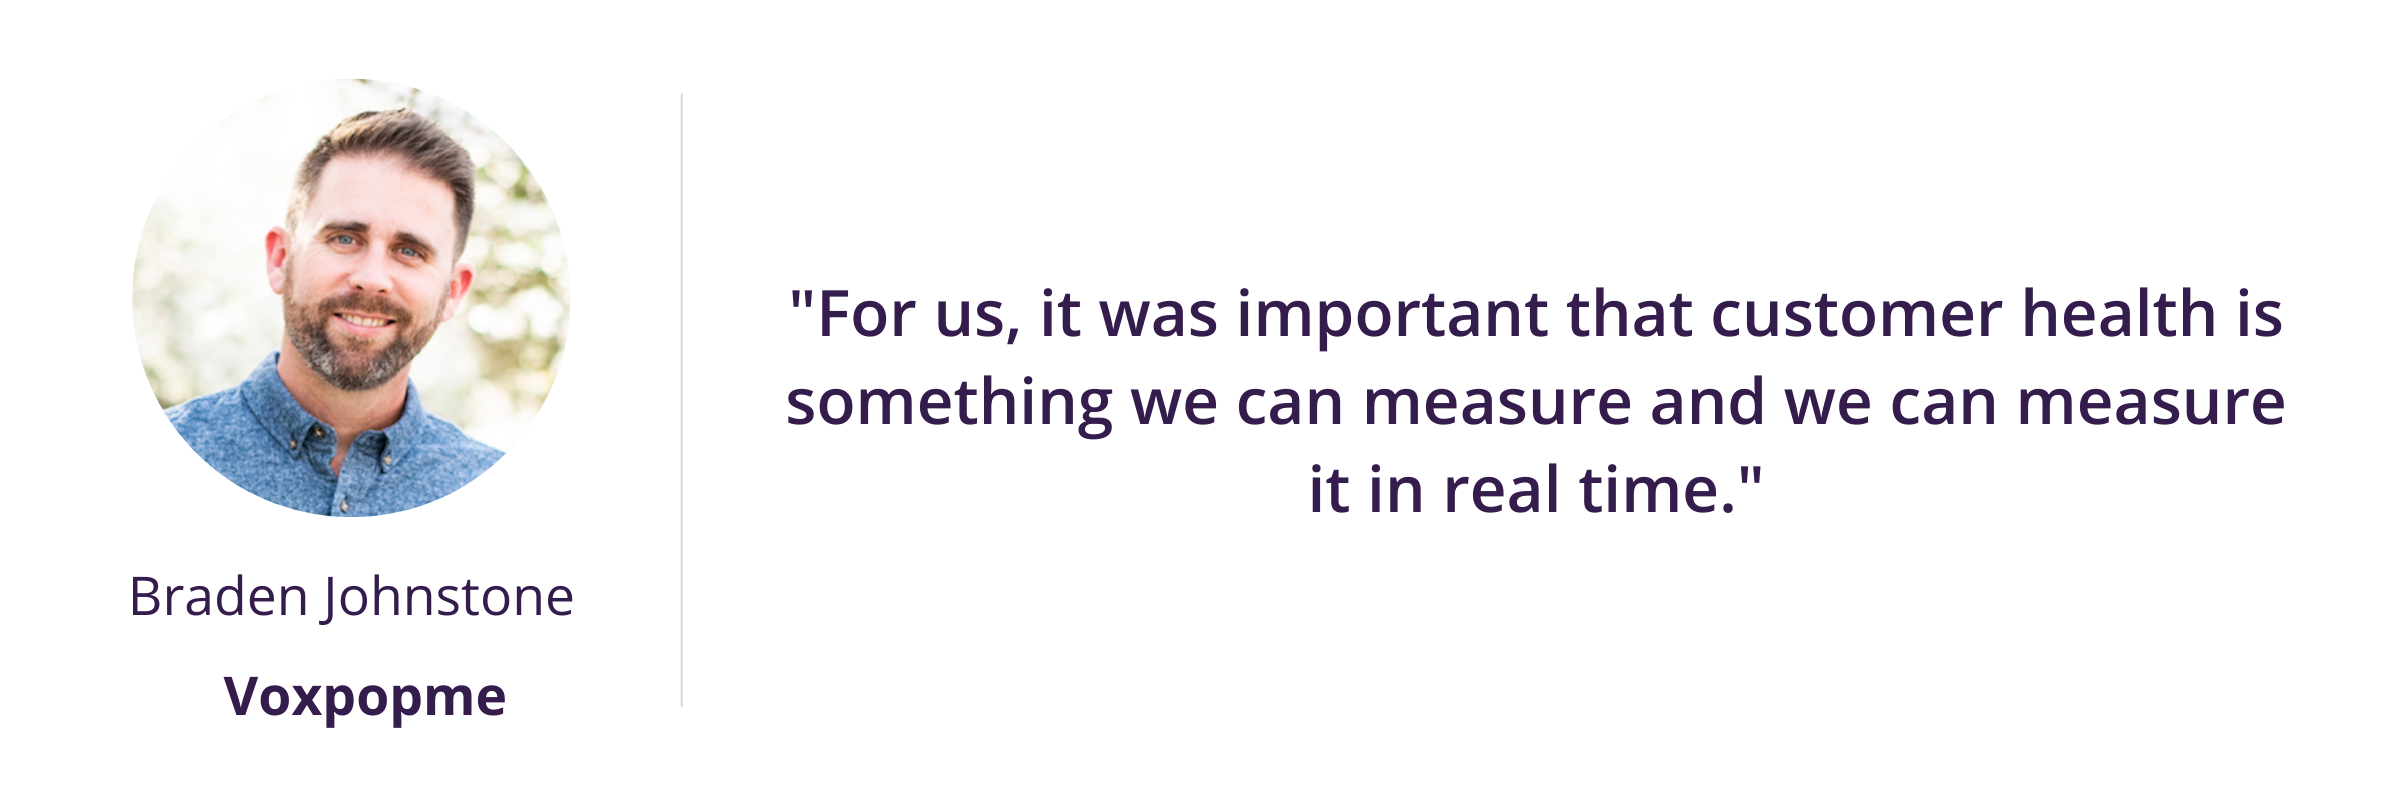 For us, it was important that customer health is something we can measure and we can measure it in real time.